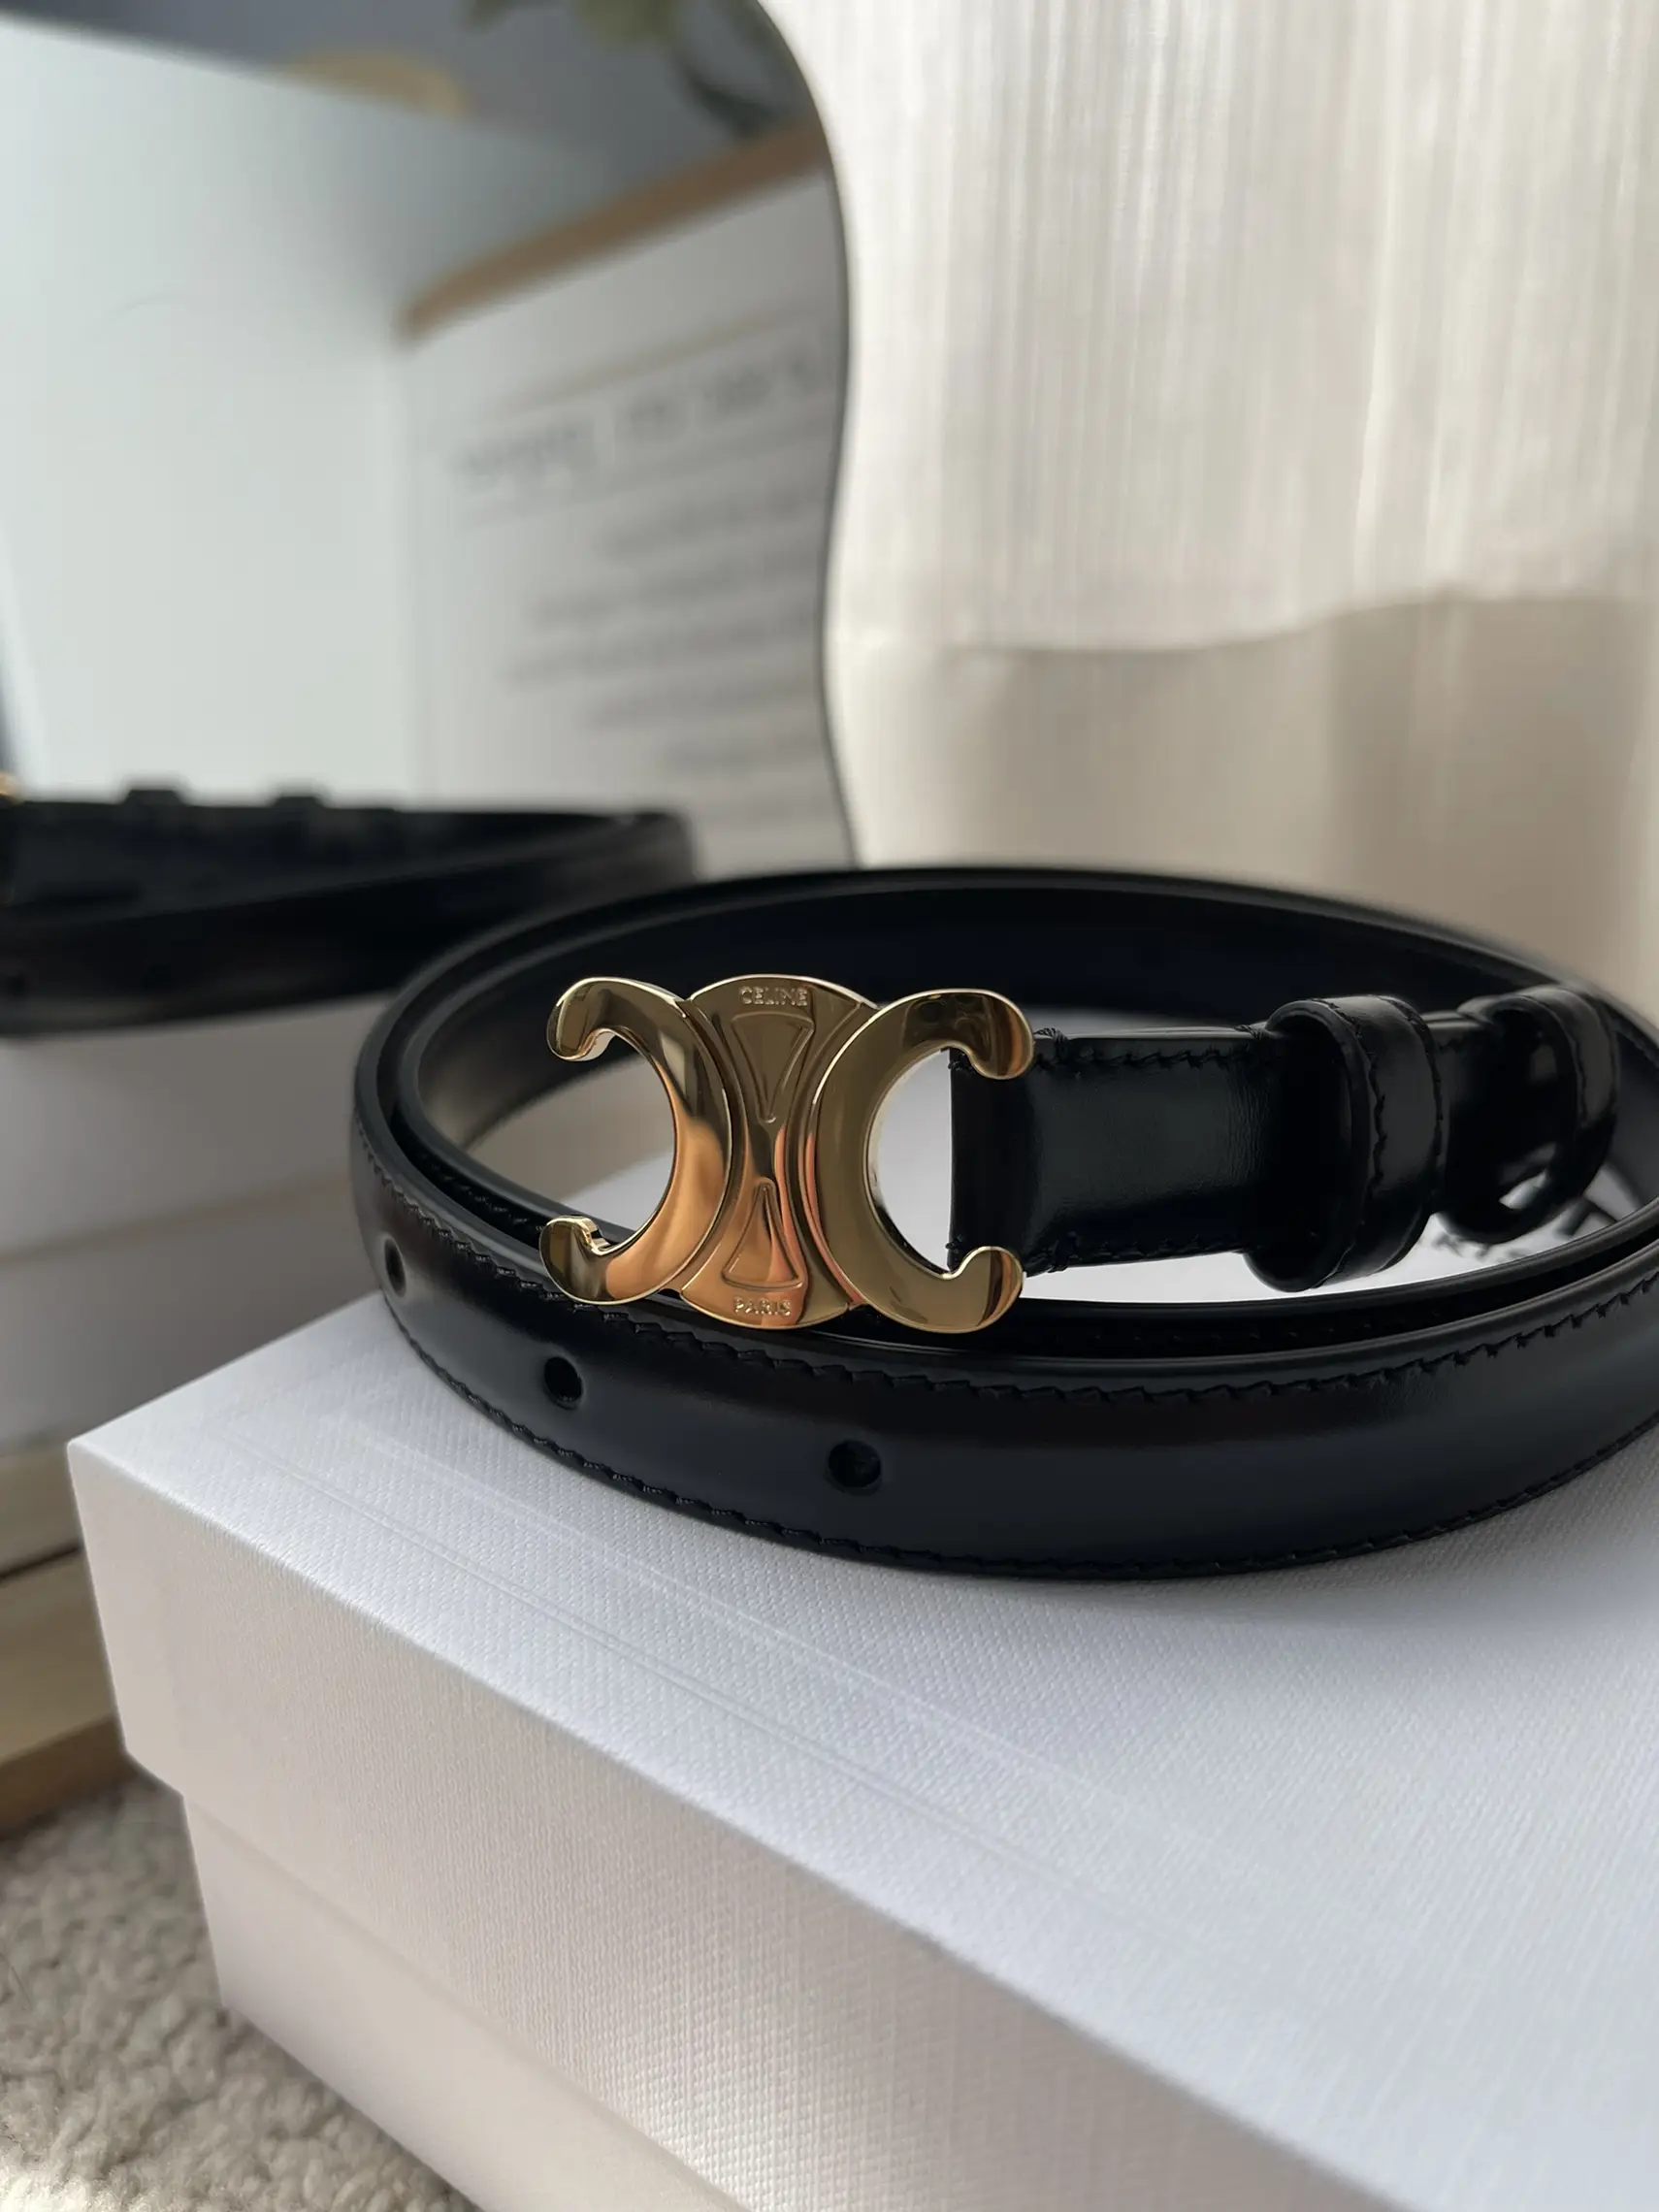 Celine Triomphe Belts Review: Black & Tan, Sizes, Try On 